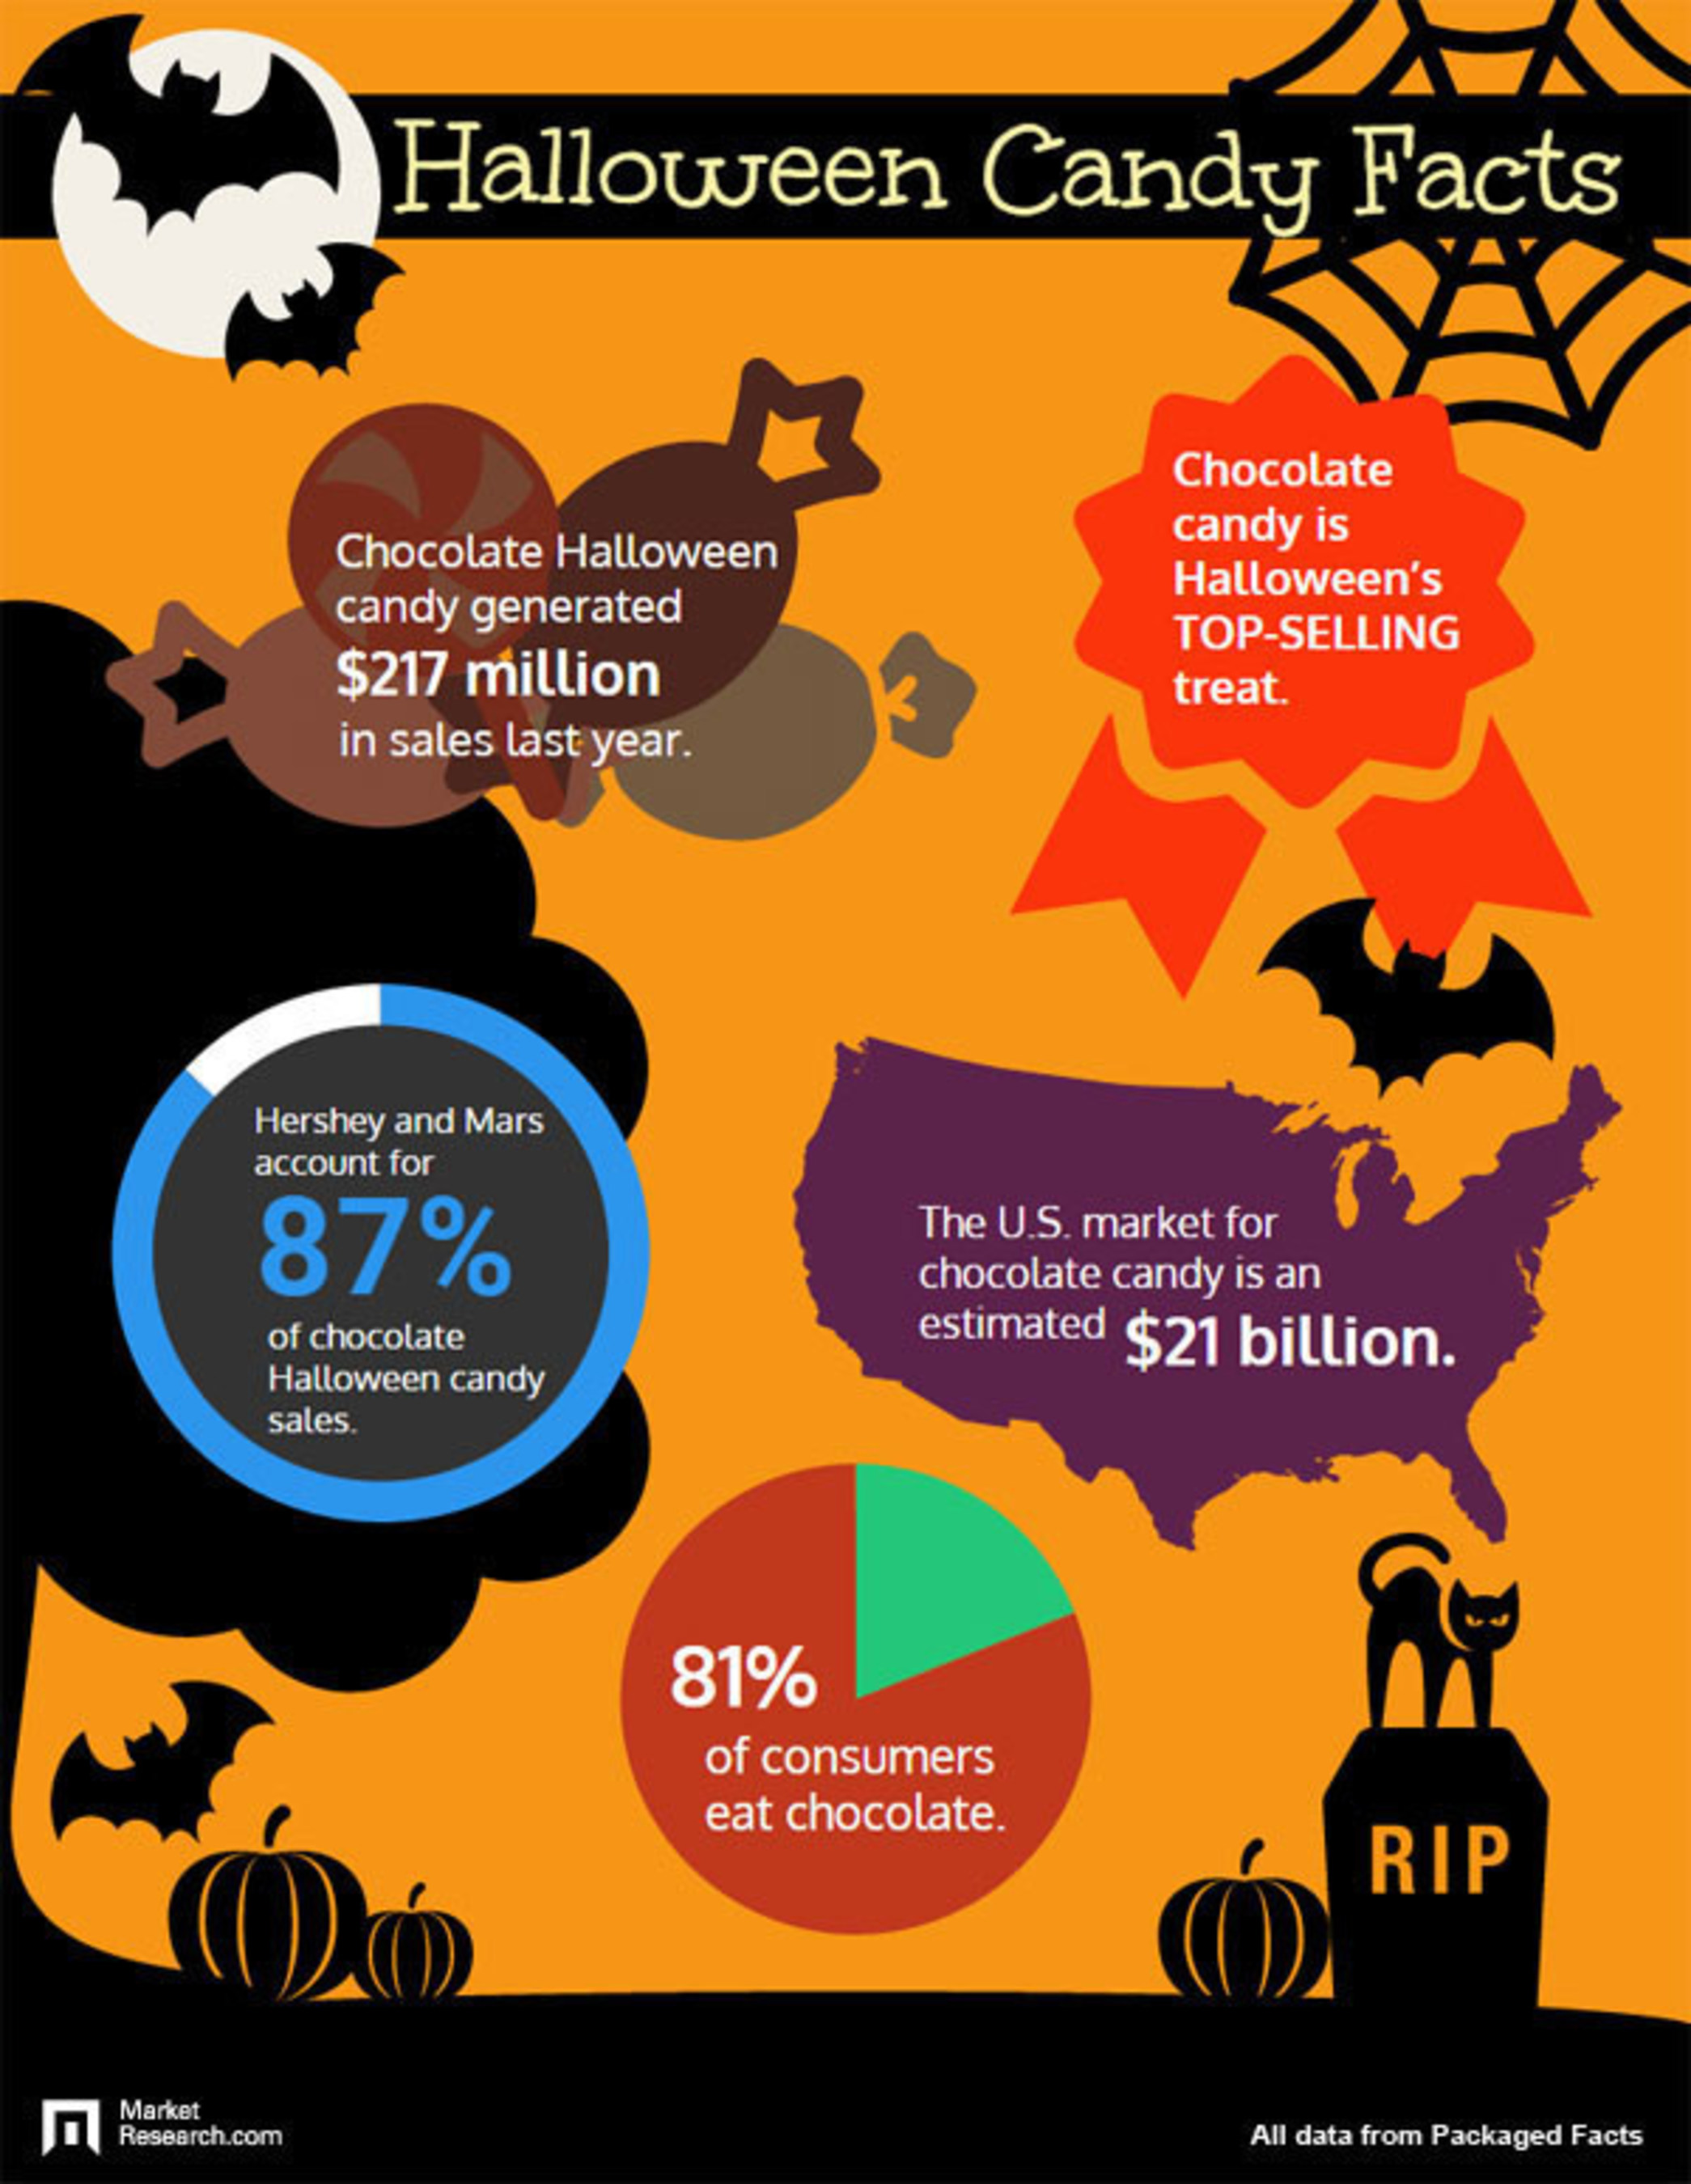 MarketResearch.com: Chocolate Halloween candy generated $217 million in 2014, and it remains the top-selling treat for the holiday.